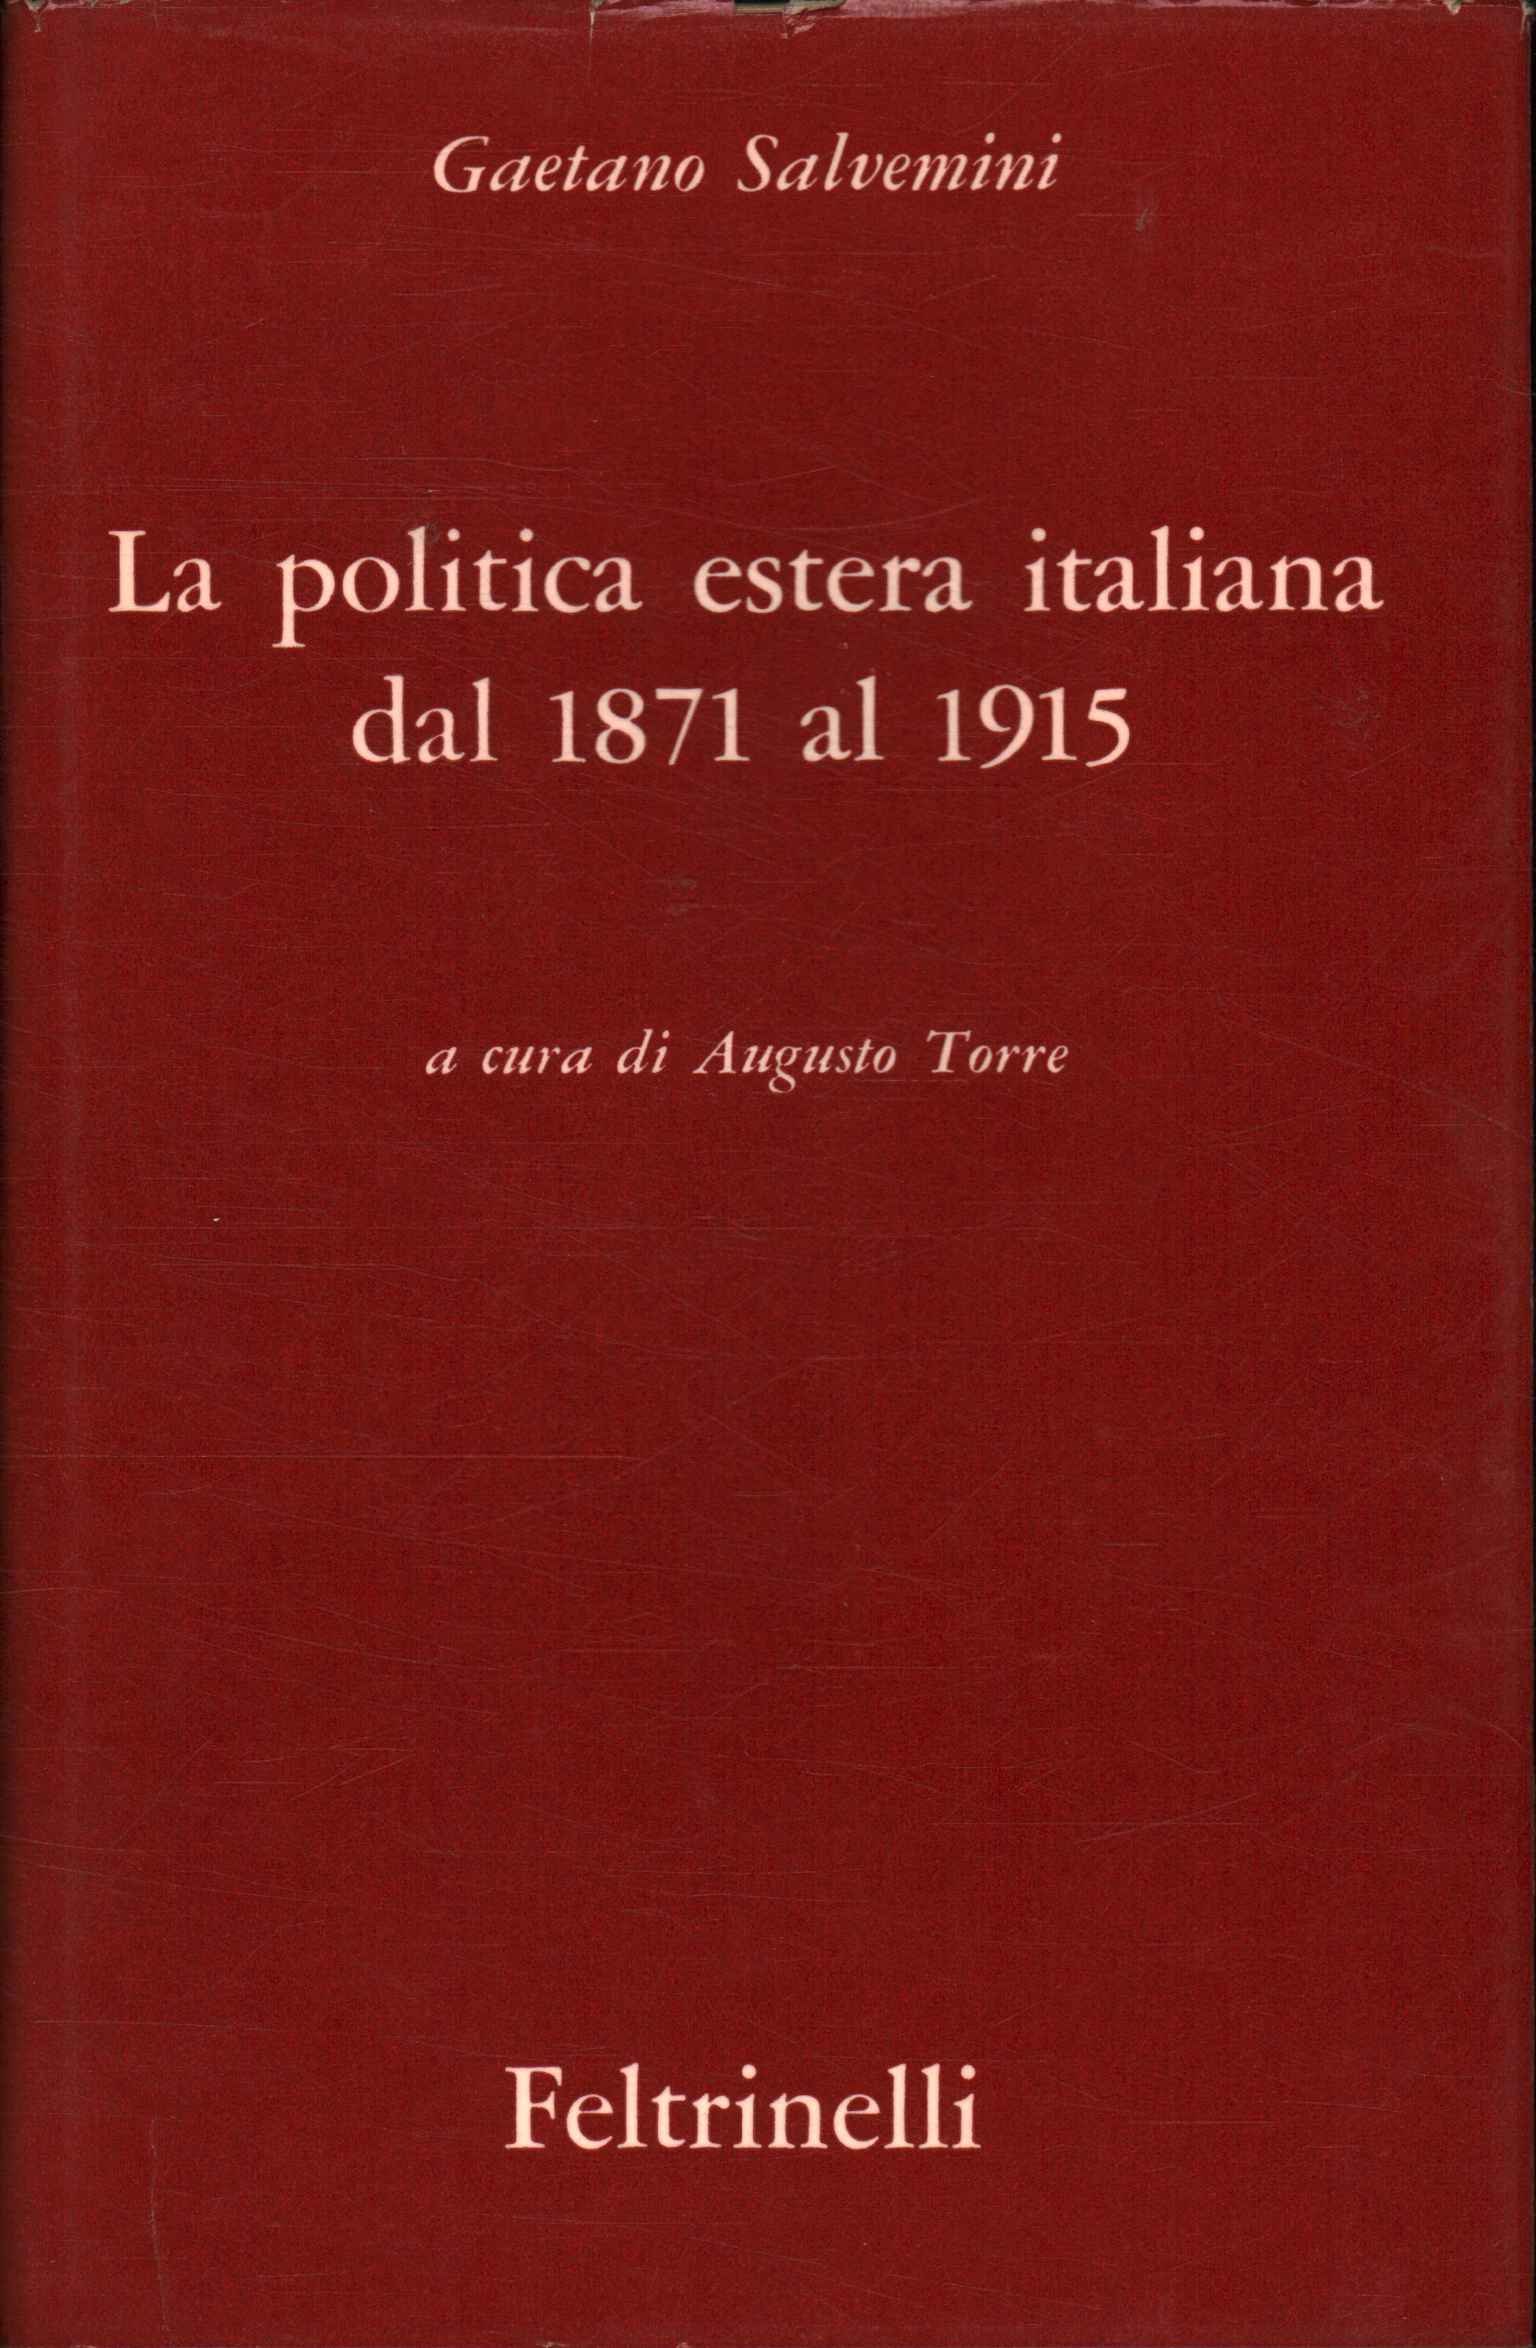 Italian foreign policy from 1871 BC